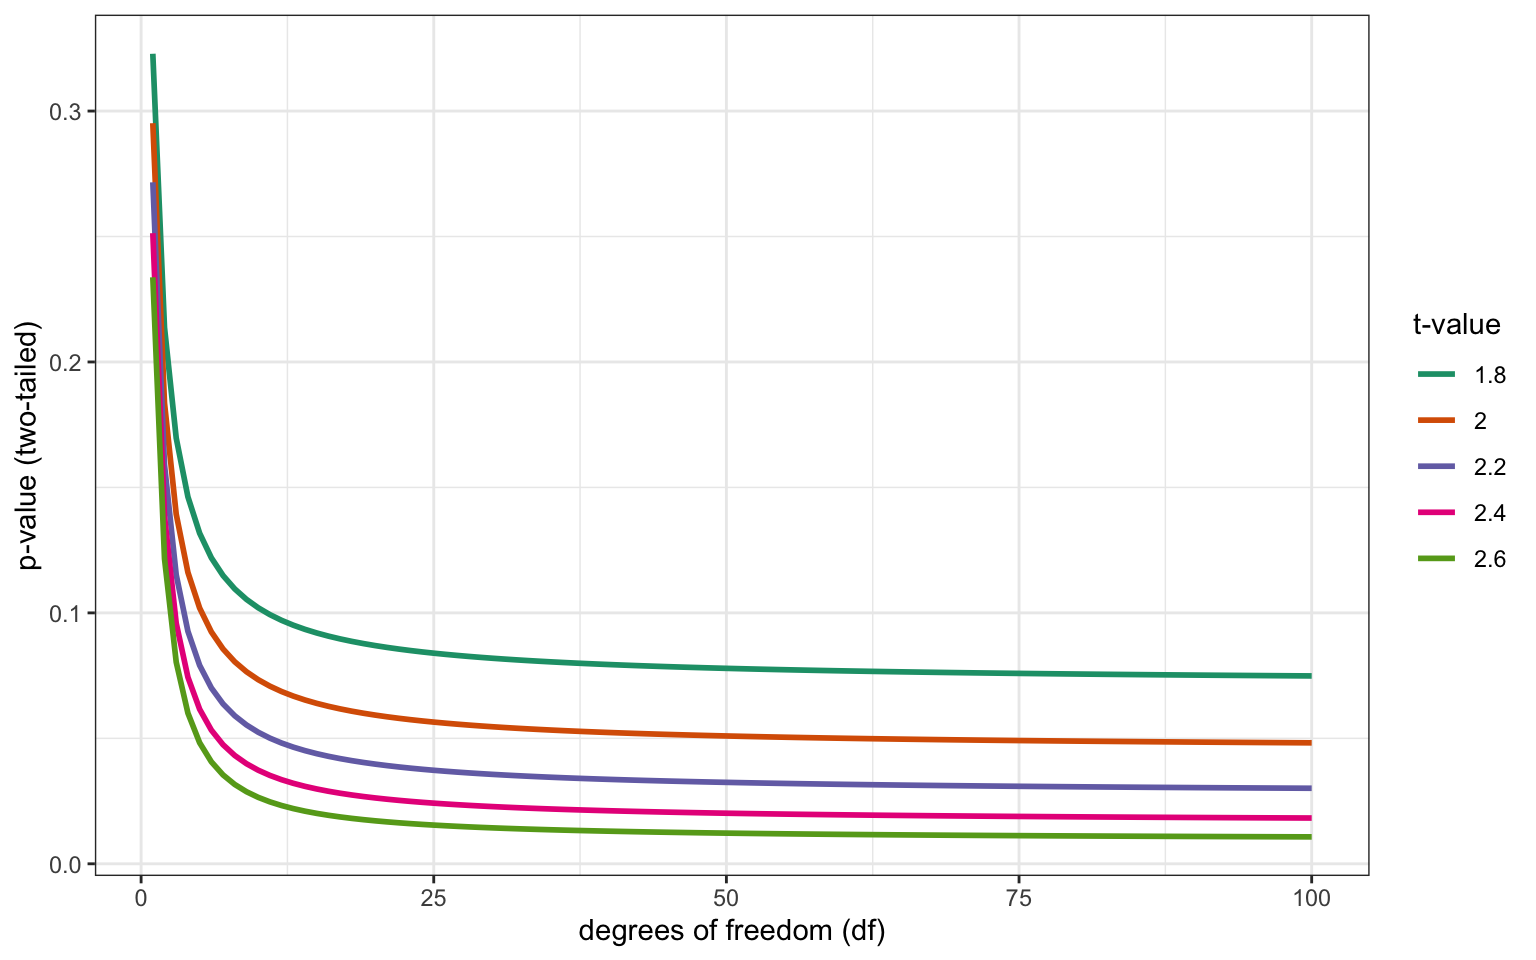 How p-values vary depending on the degrees of freedom for specific t-values in a t-test.